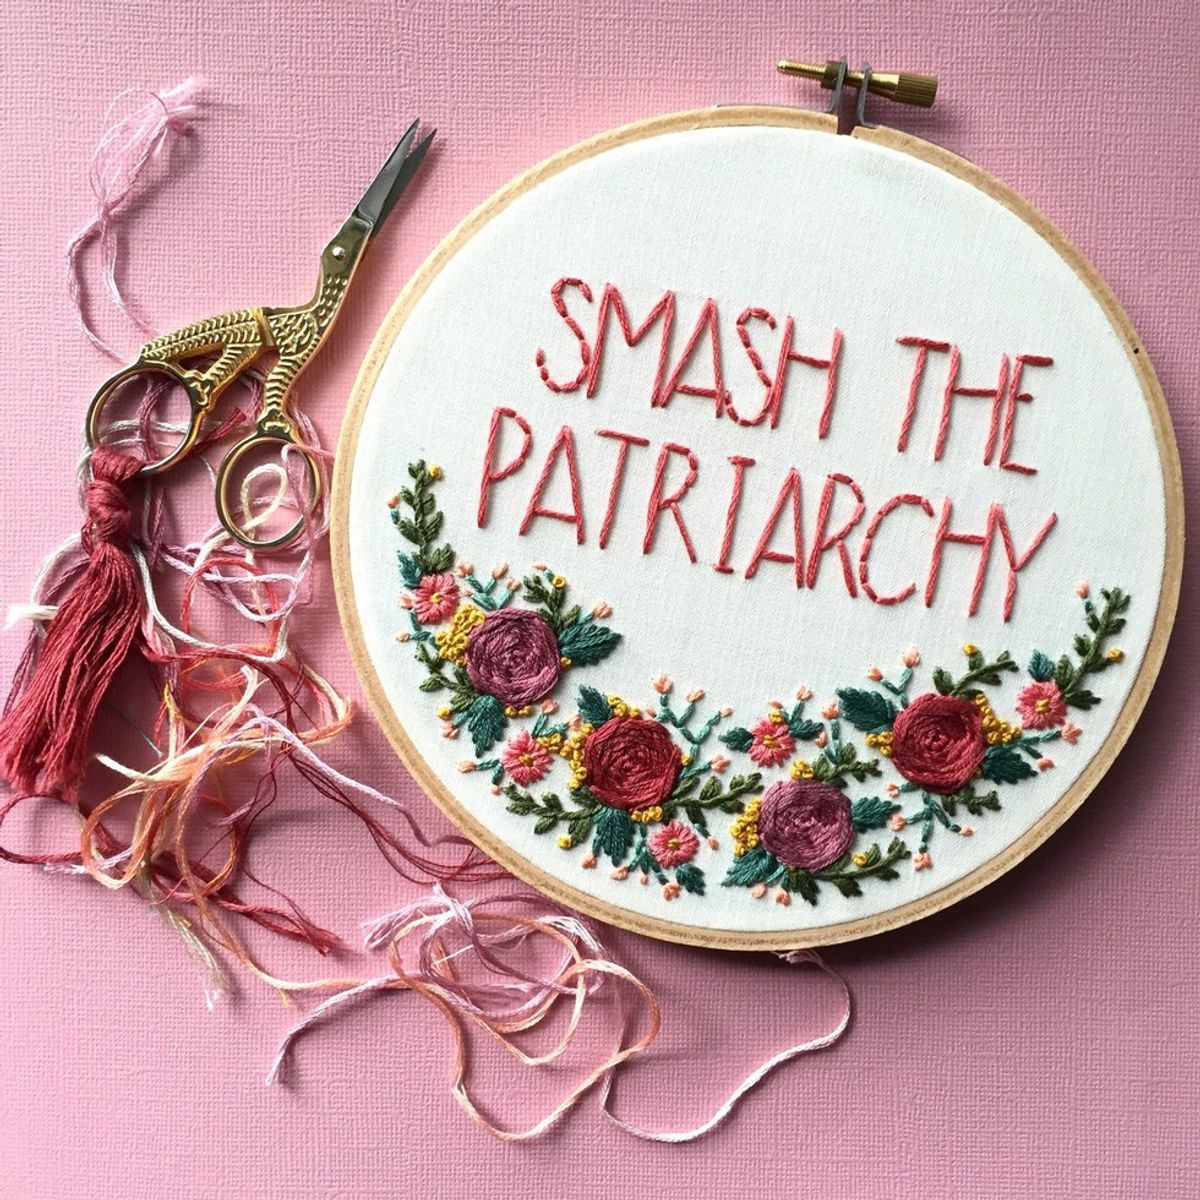 'Smashing the Patriarchy' And How It's Hurting The Movement For Gender Equality